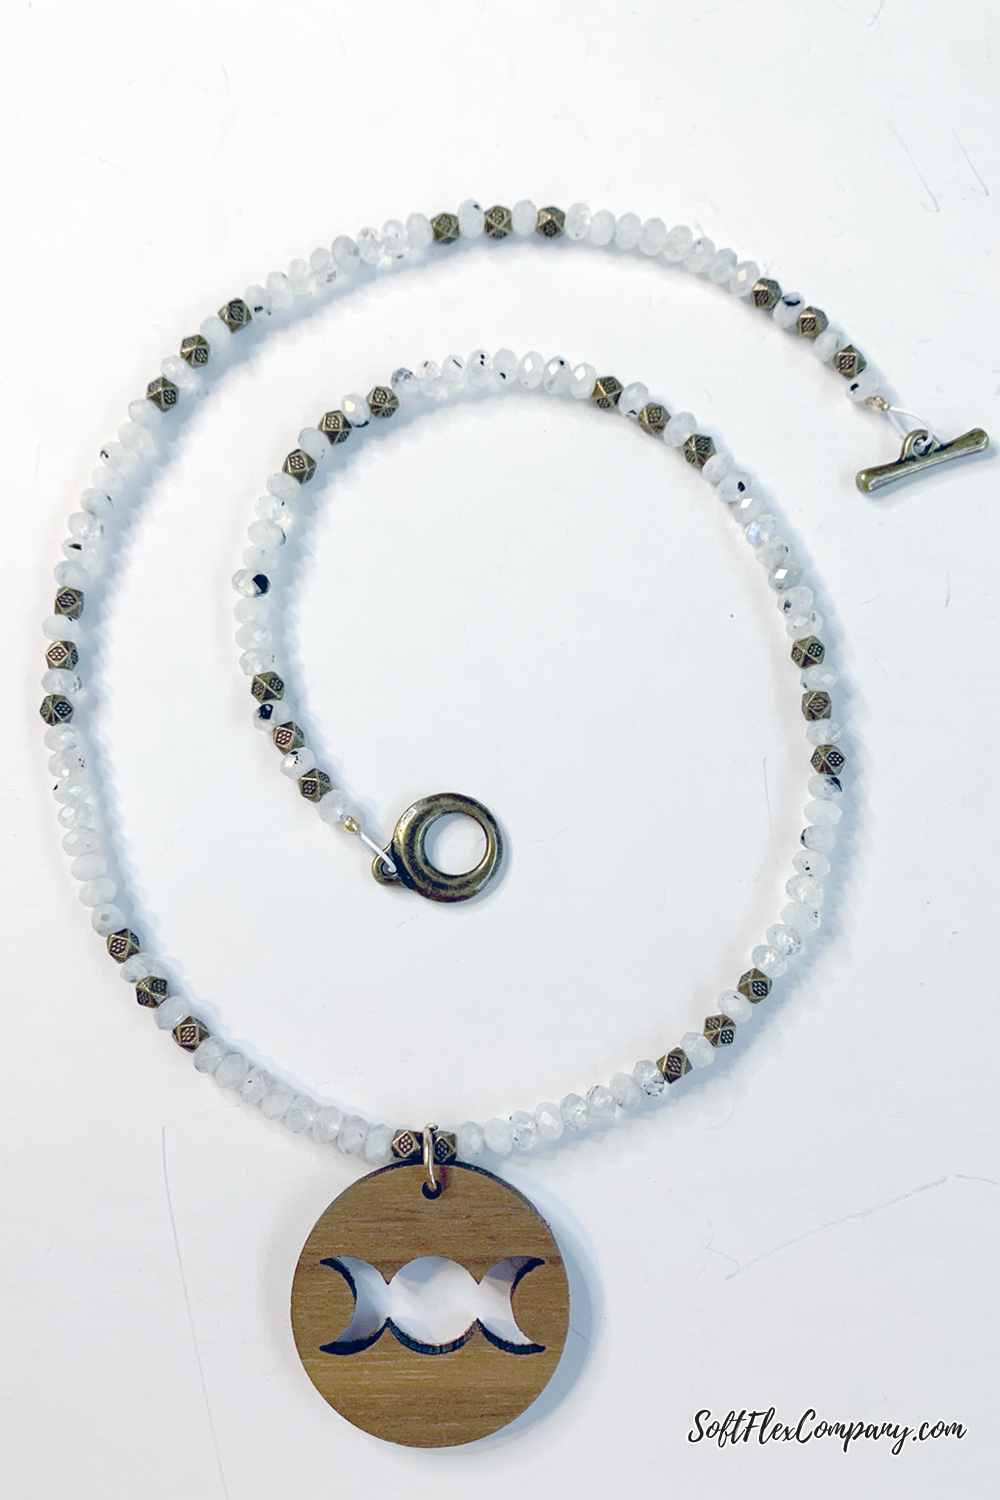 Triple Goddess Necklace With Moonstone Beads by Kristen Fagan